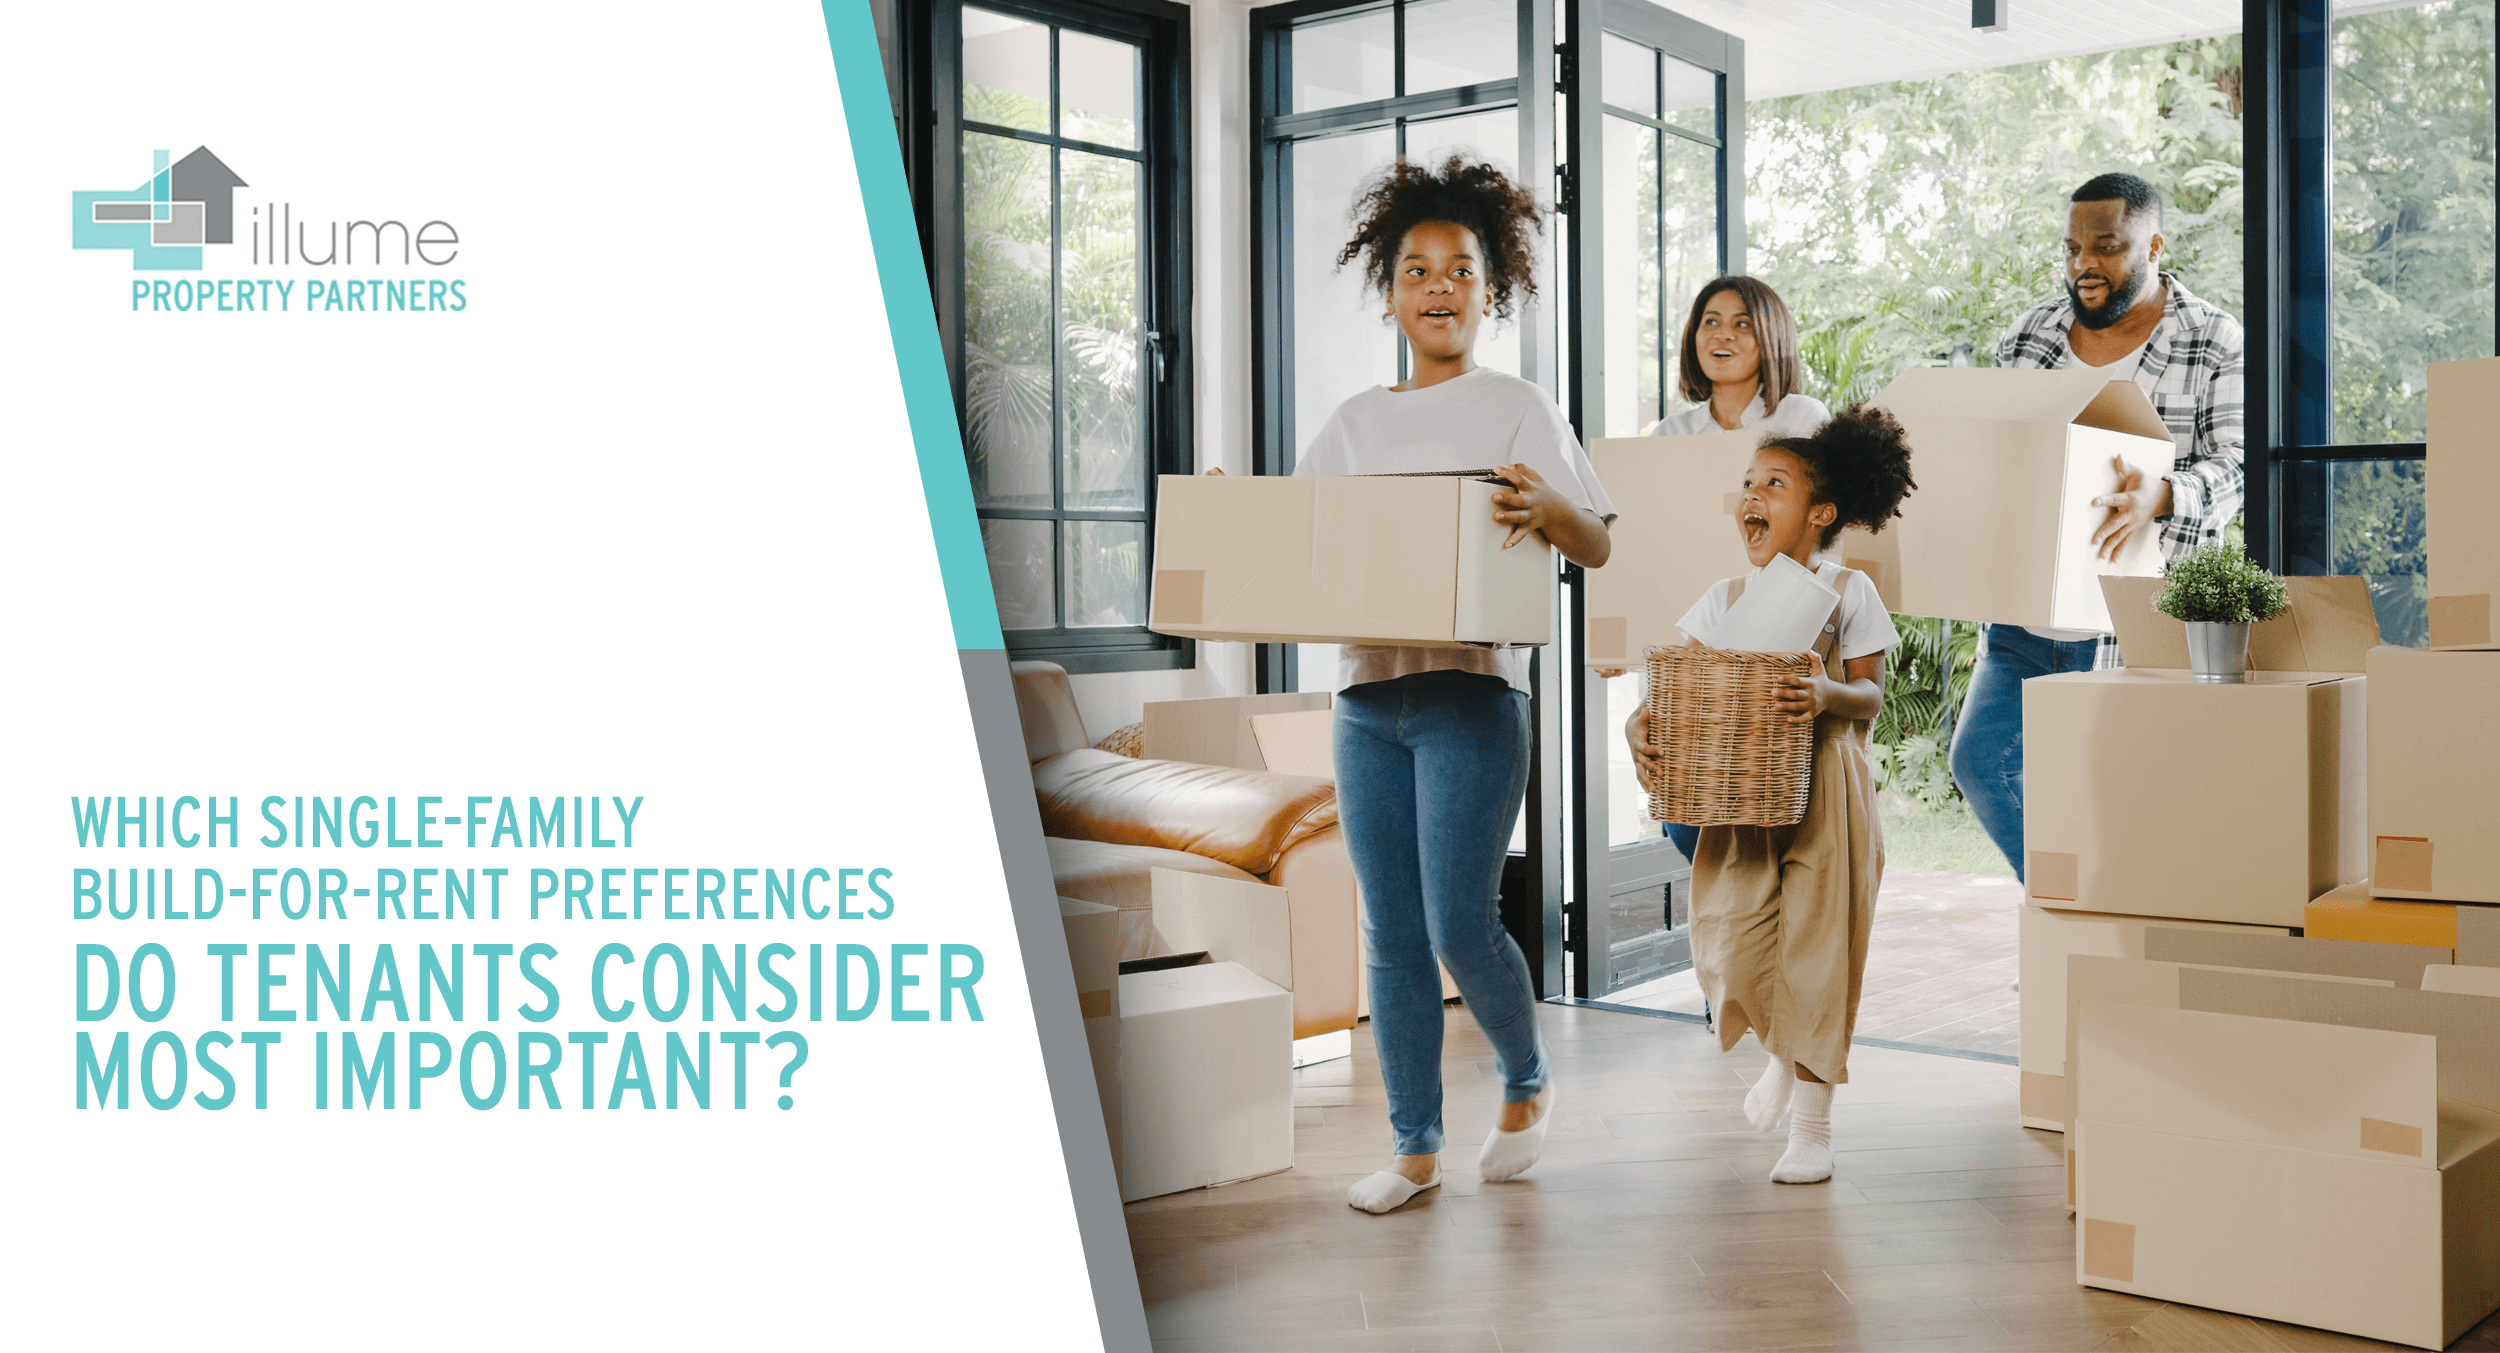 What Are Tenant Preferences In Single-Family Build-For-Rent?